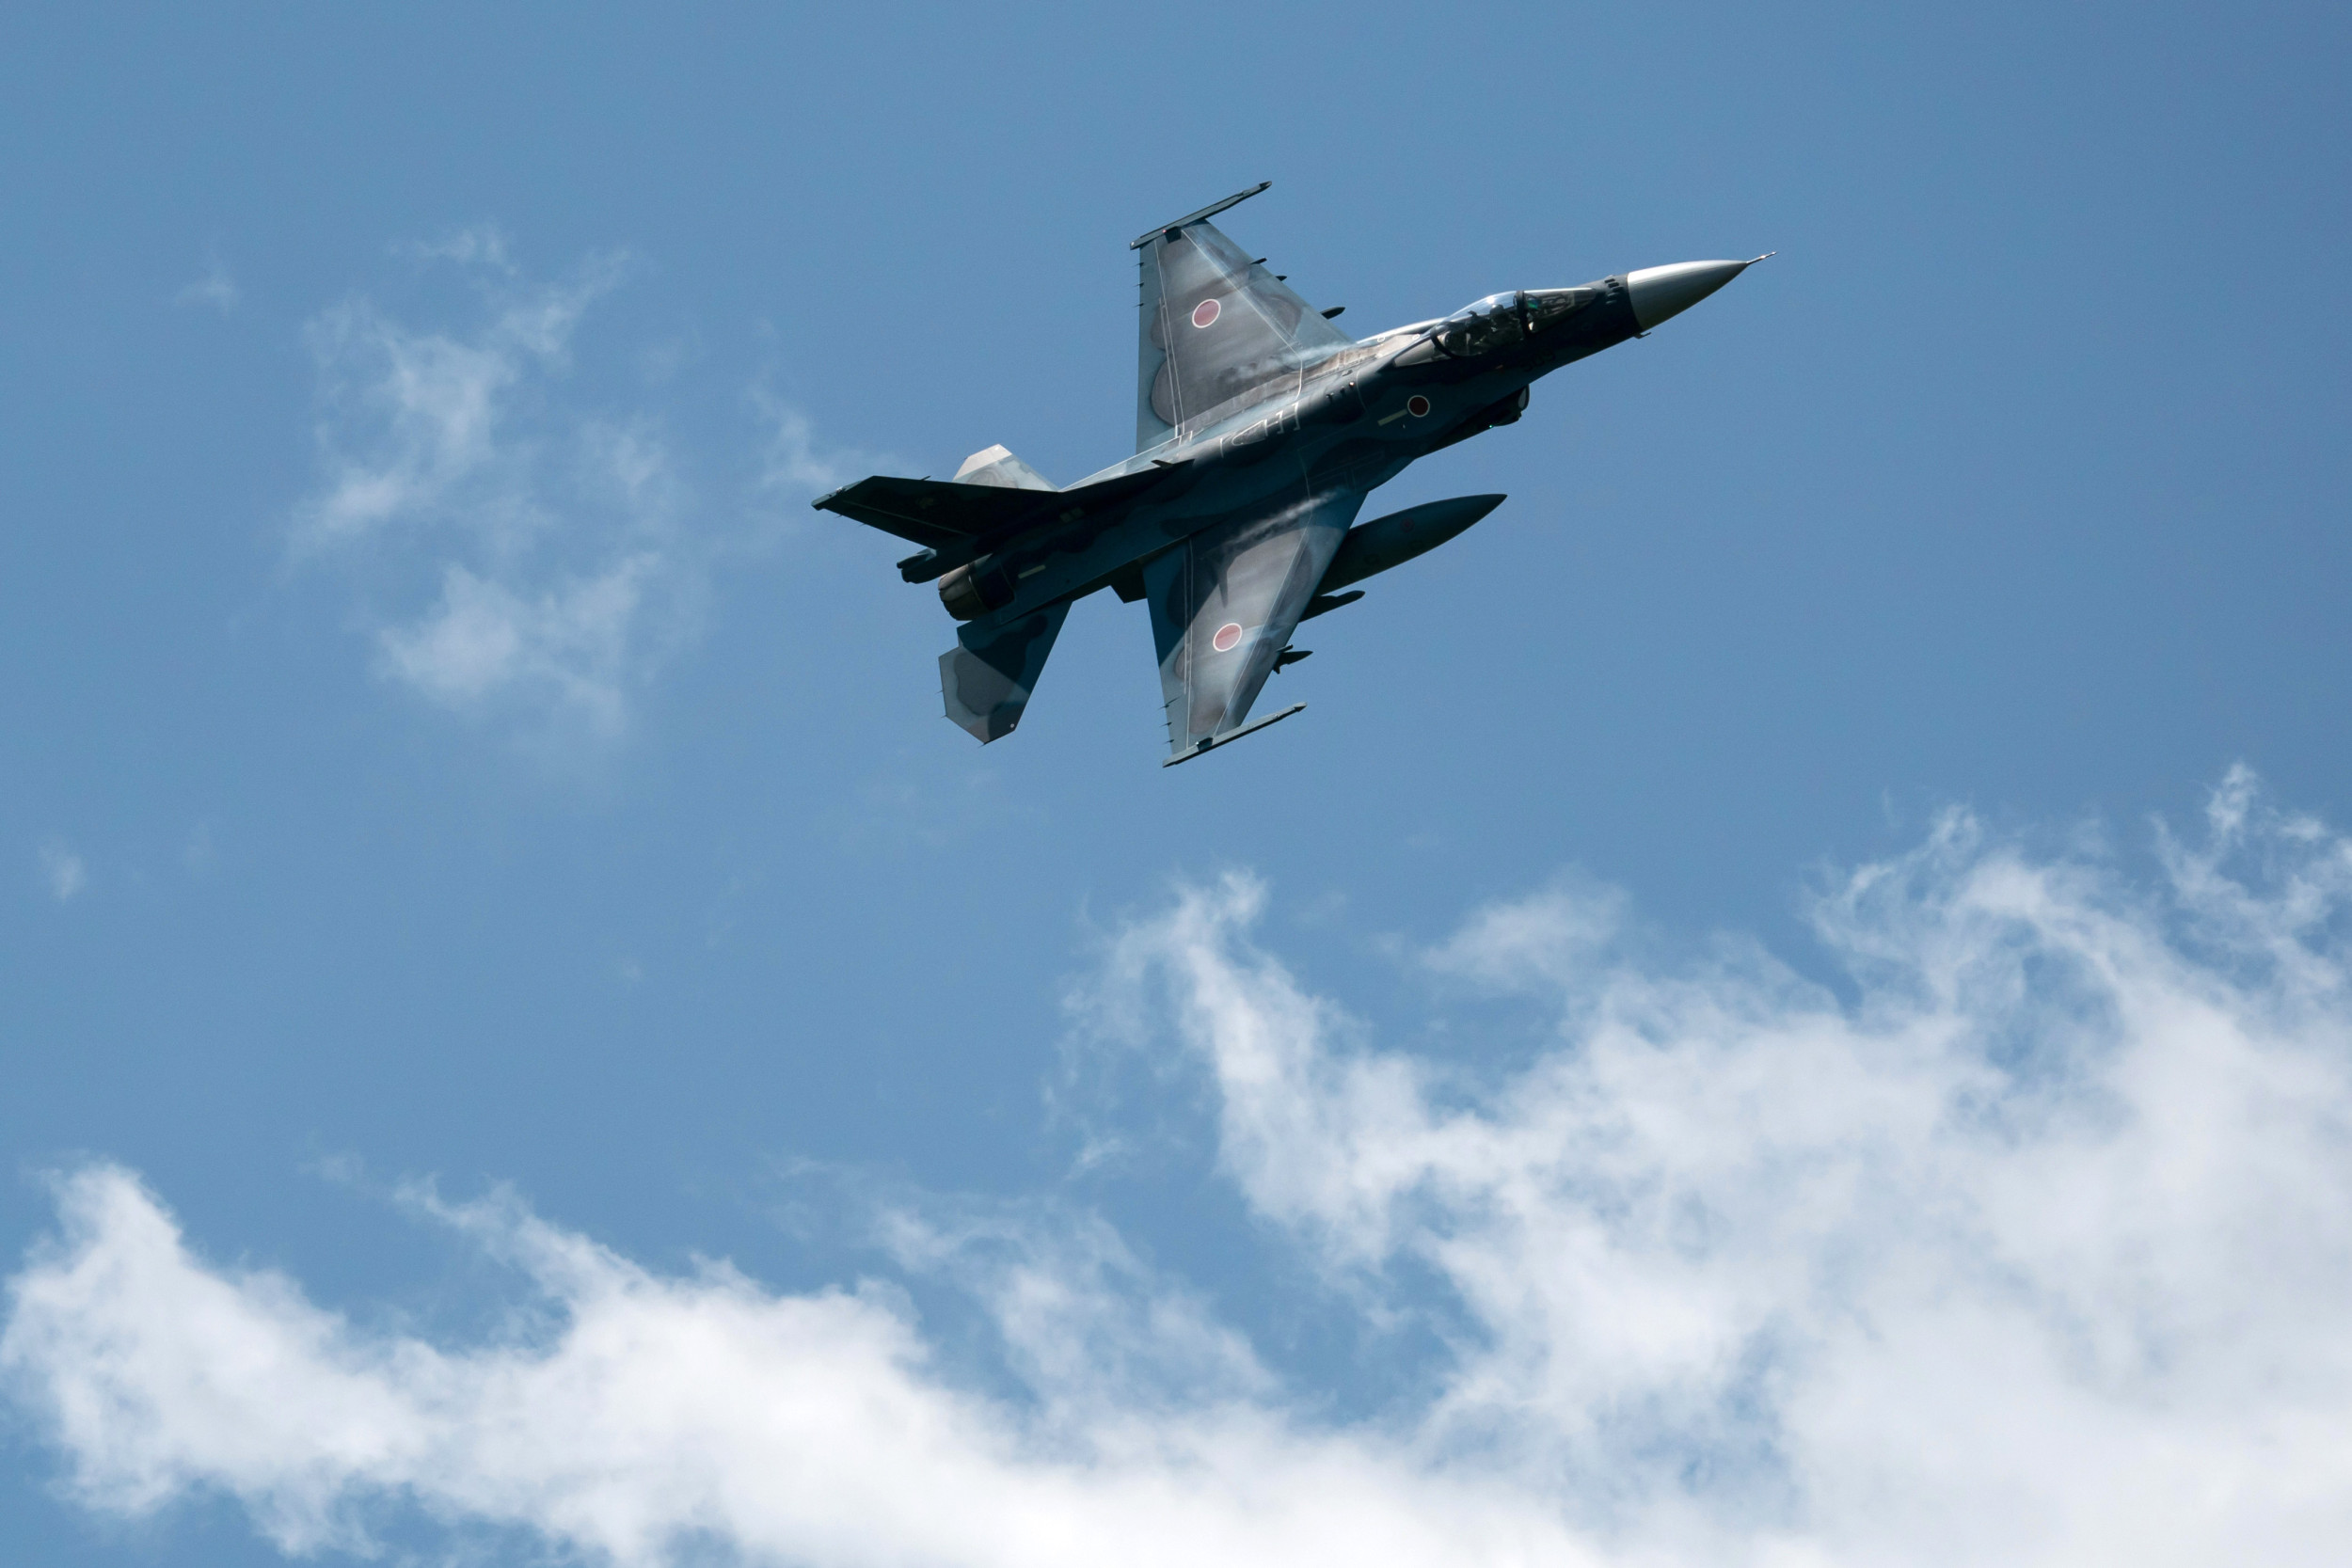 Japan's Intercepts of Chinese Aircraft on the Rise - Newsweek